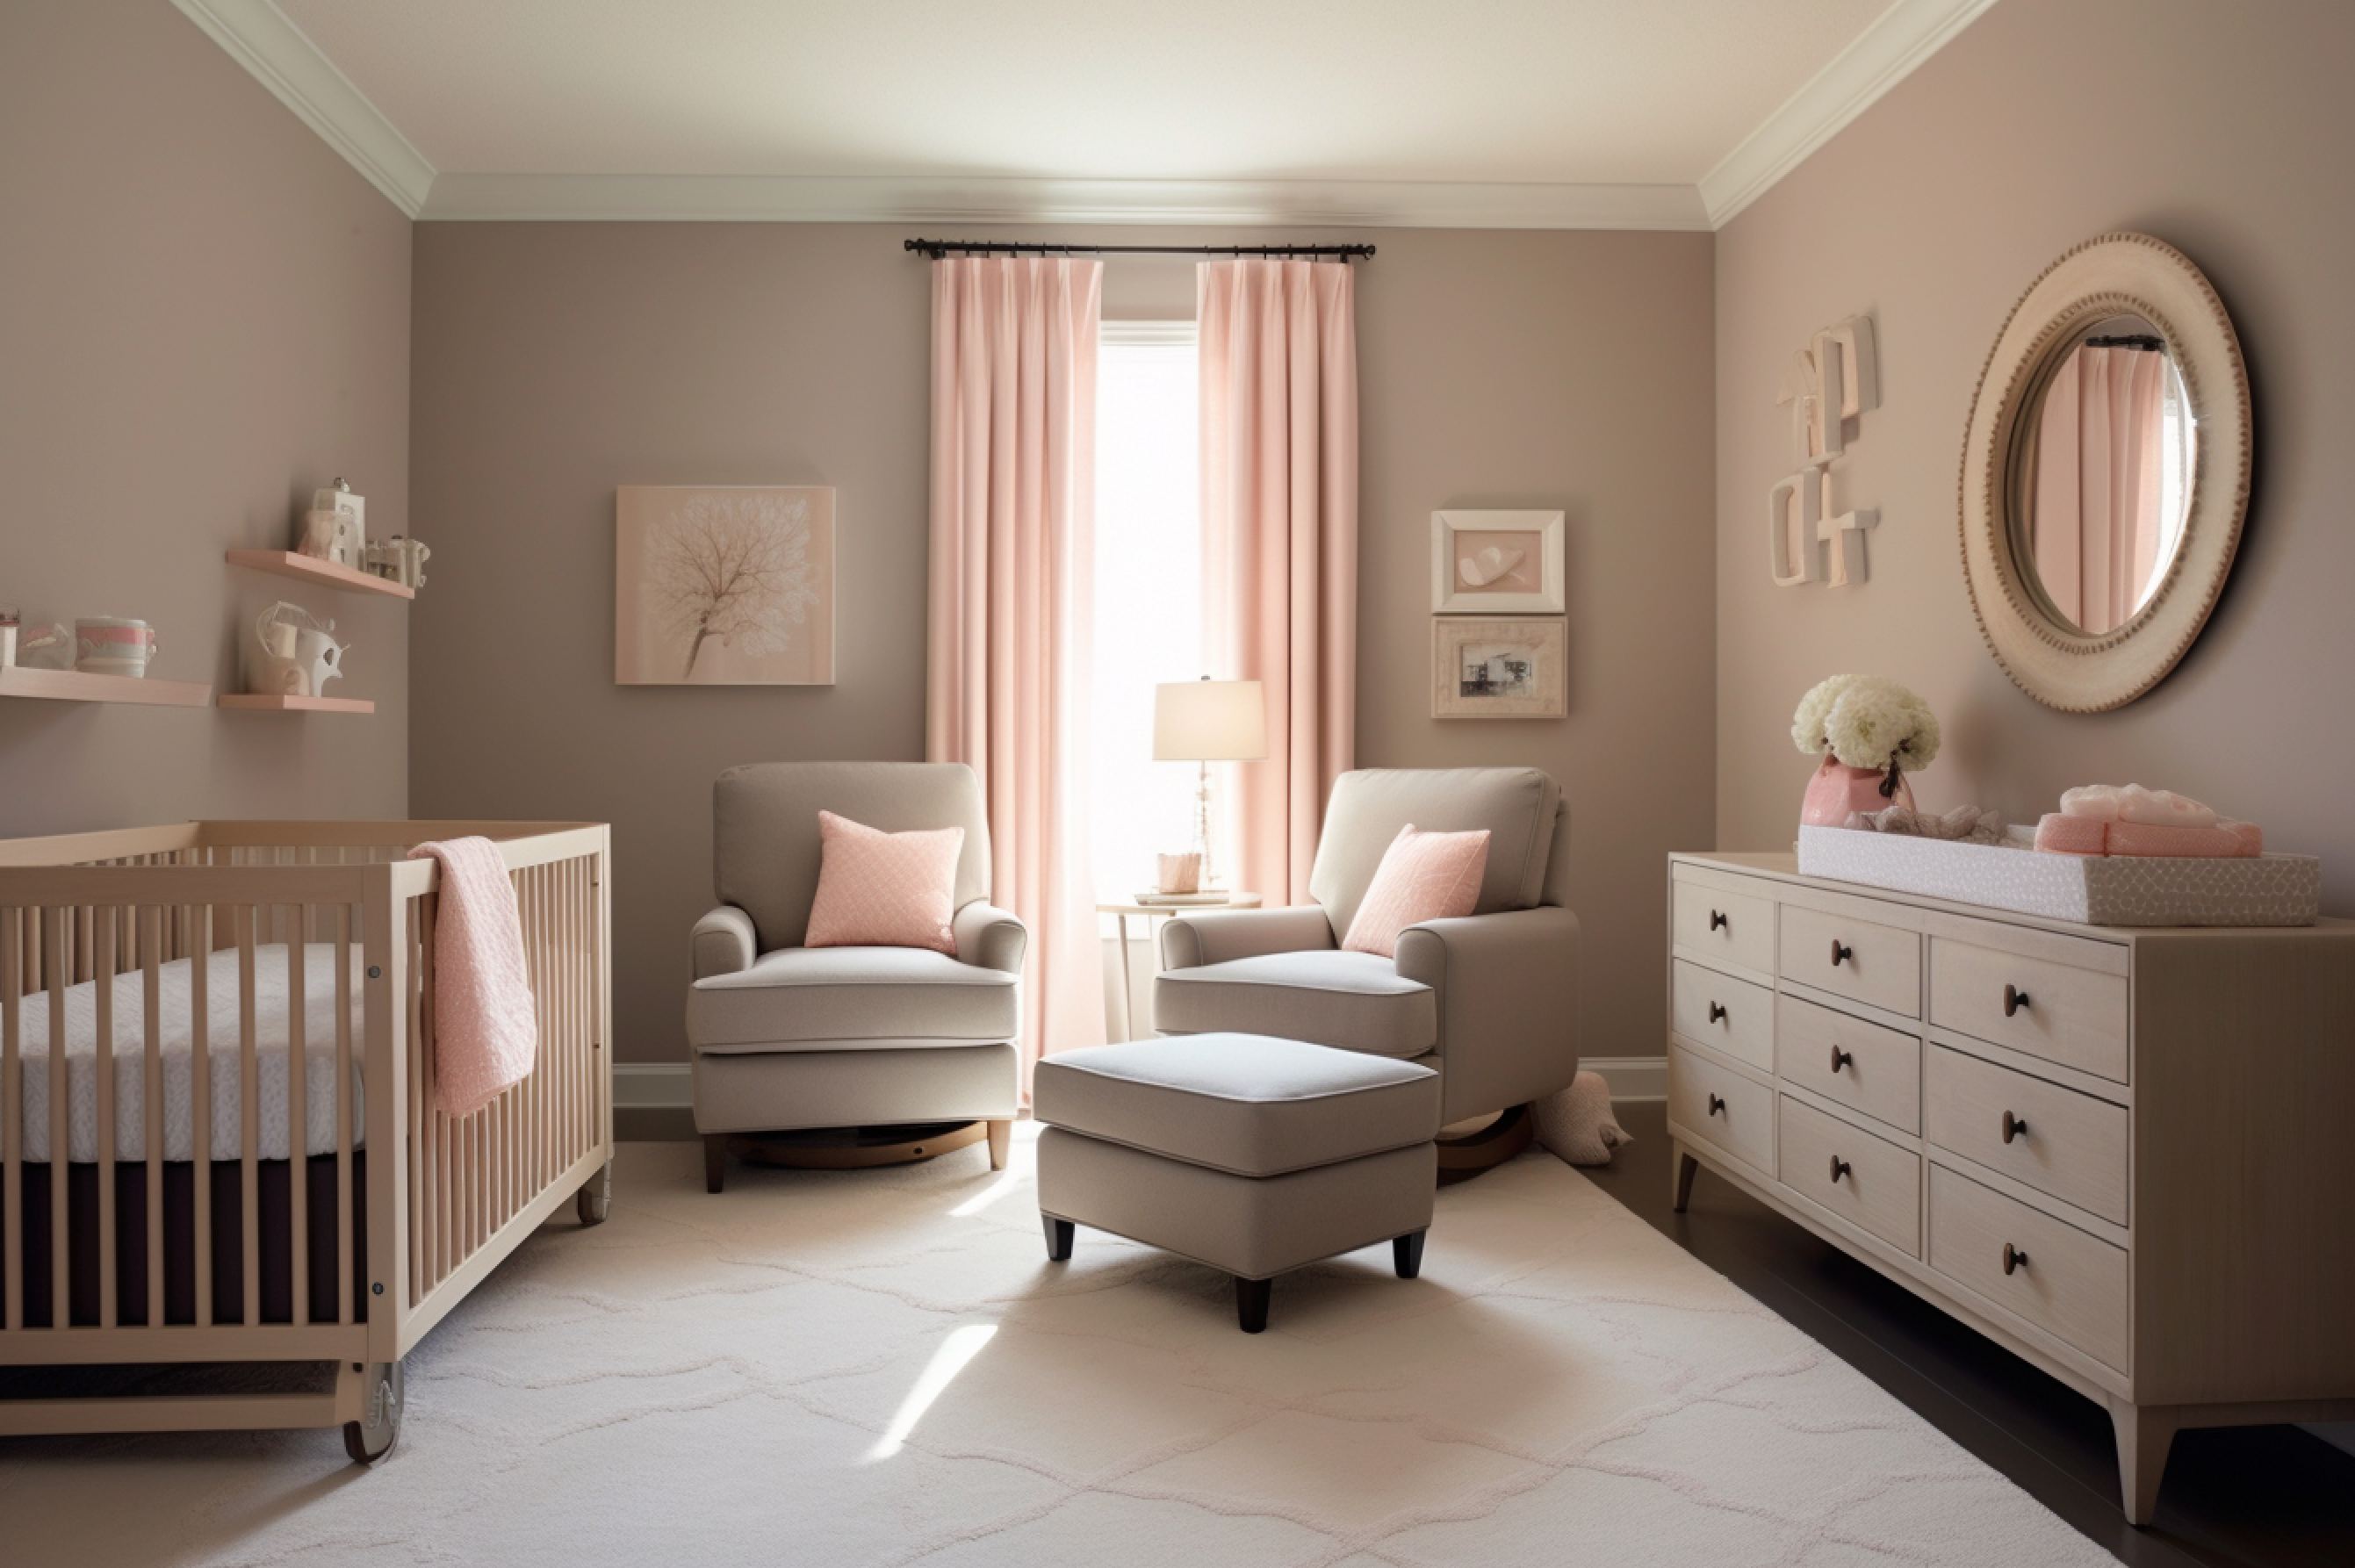 Image showcasing a nursery room with taupe brown furniture accentuated by pastel pink accessories and wall decor.